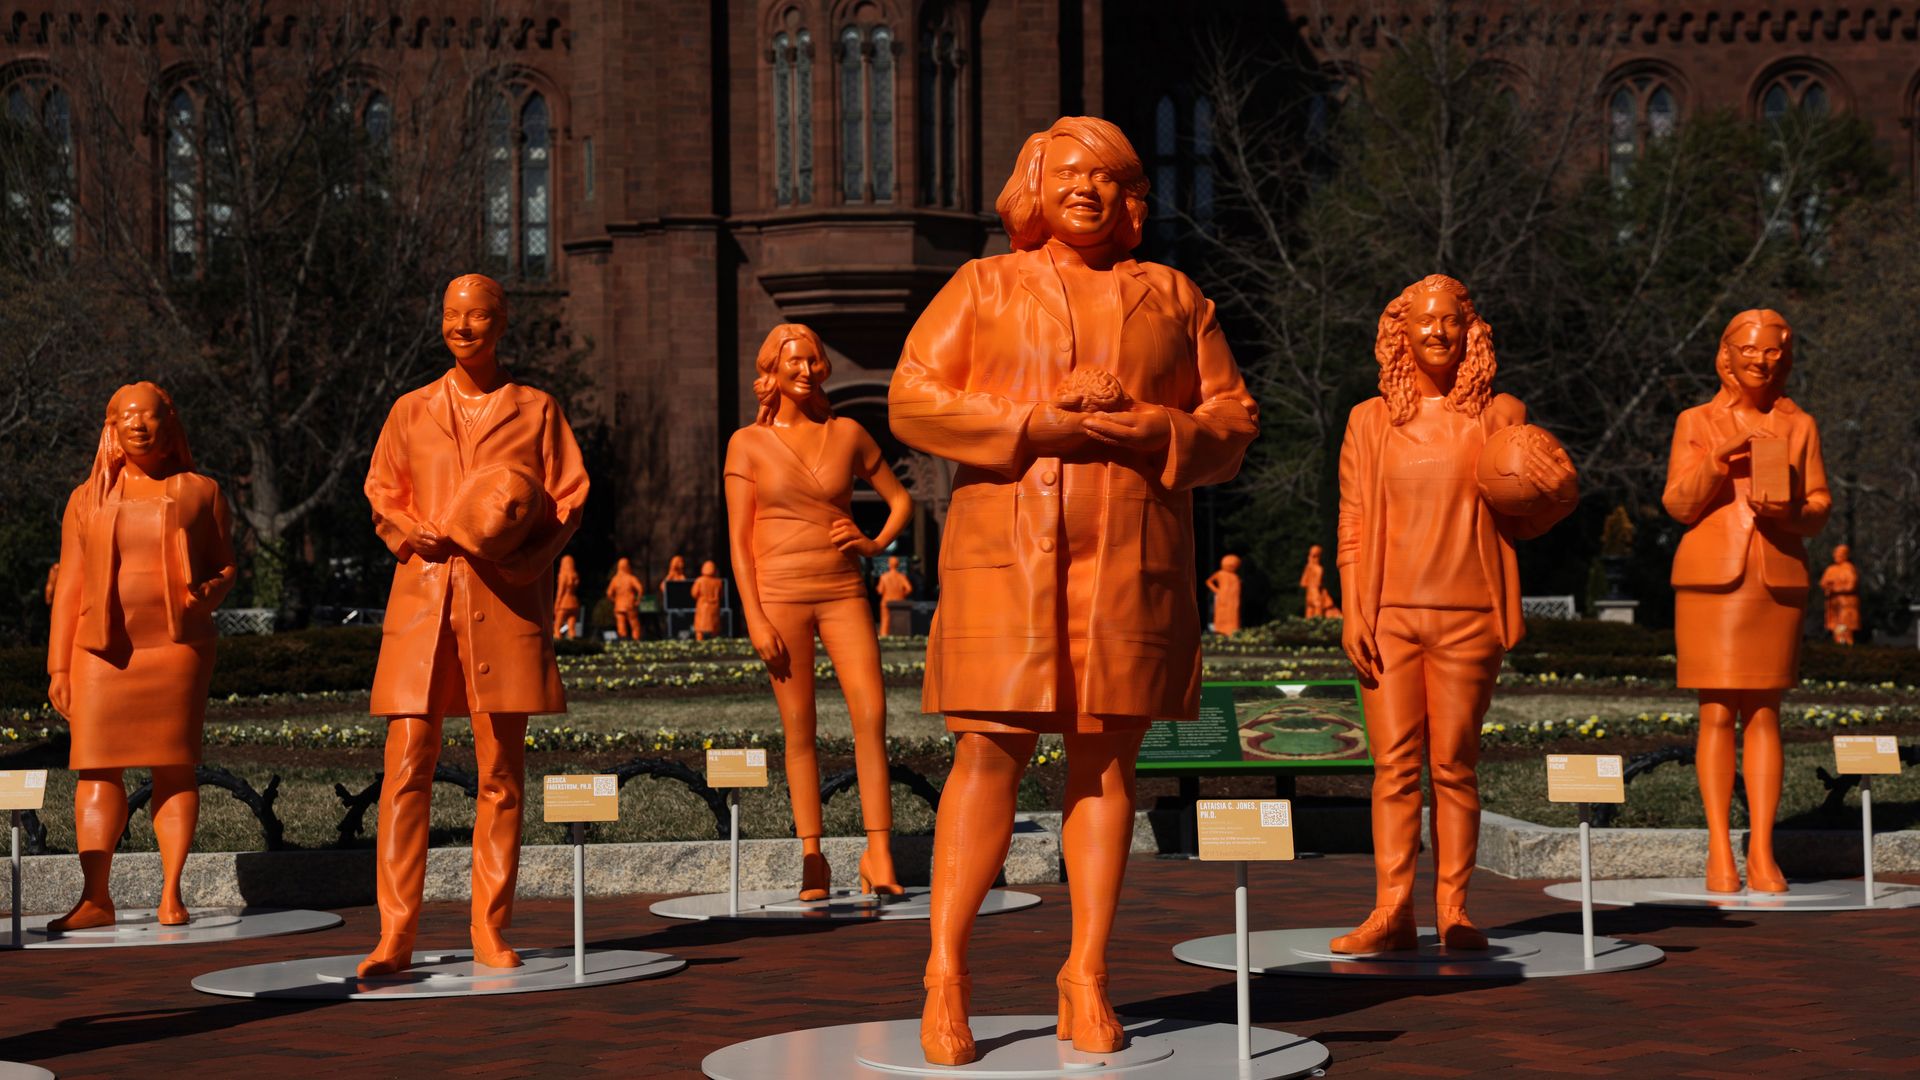 Life-size 3D-printed statues honoring women in STEM are seen at the Enid A. Haupt Garden outside the Smithsonian Castle March 4, 2022 in Washington, DC.